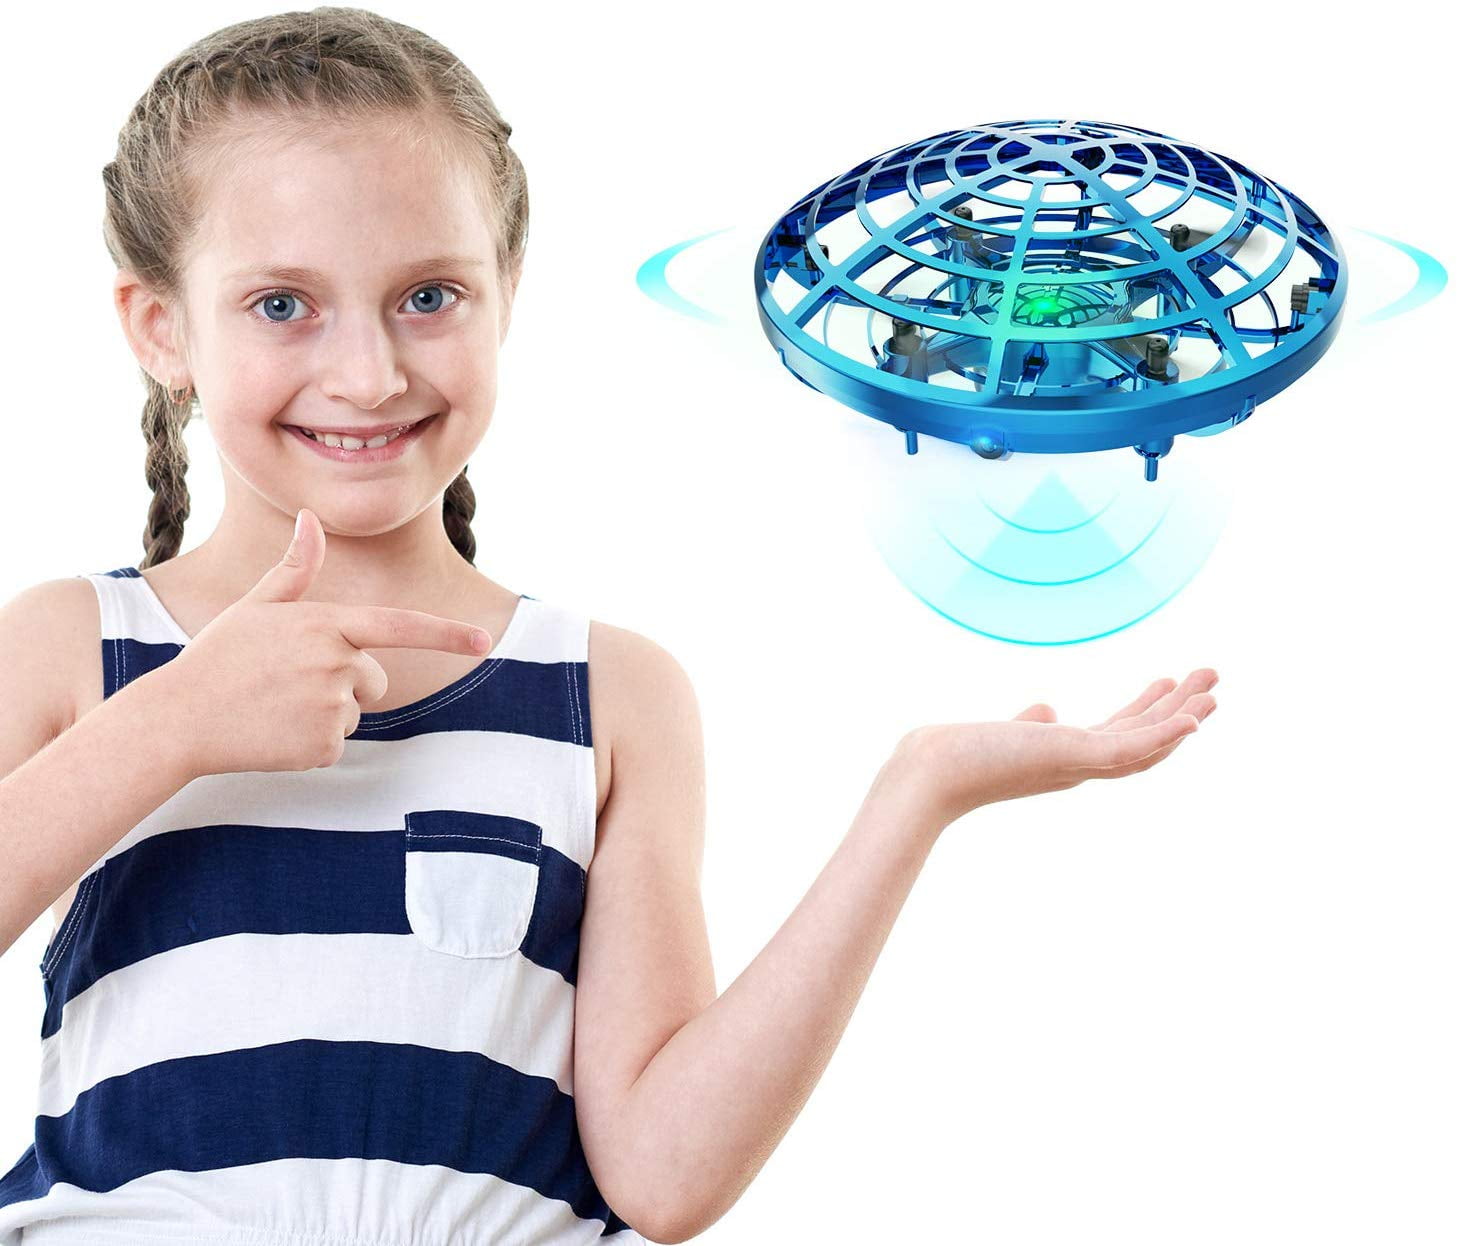 Mini Drone Gravity Sensor Quad Induction UFO Flying Toy Hand-Controlled Kid Gift